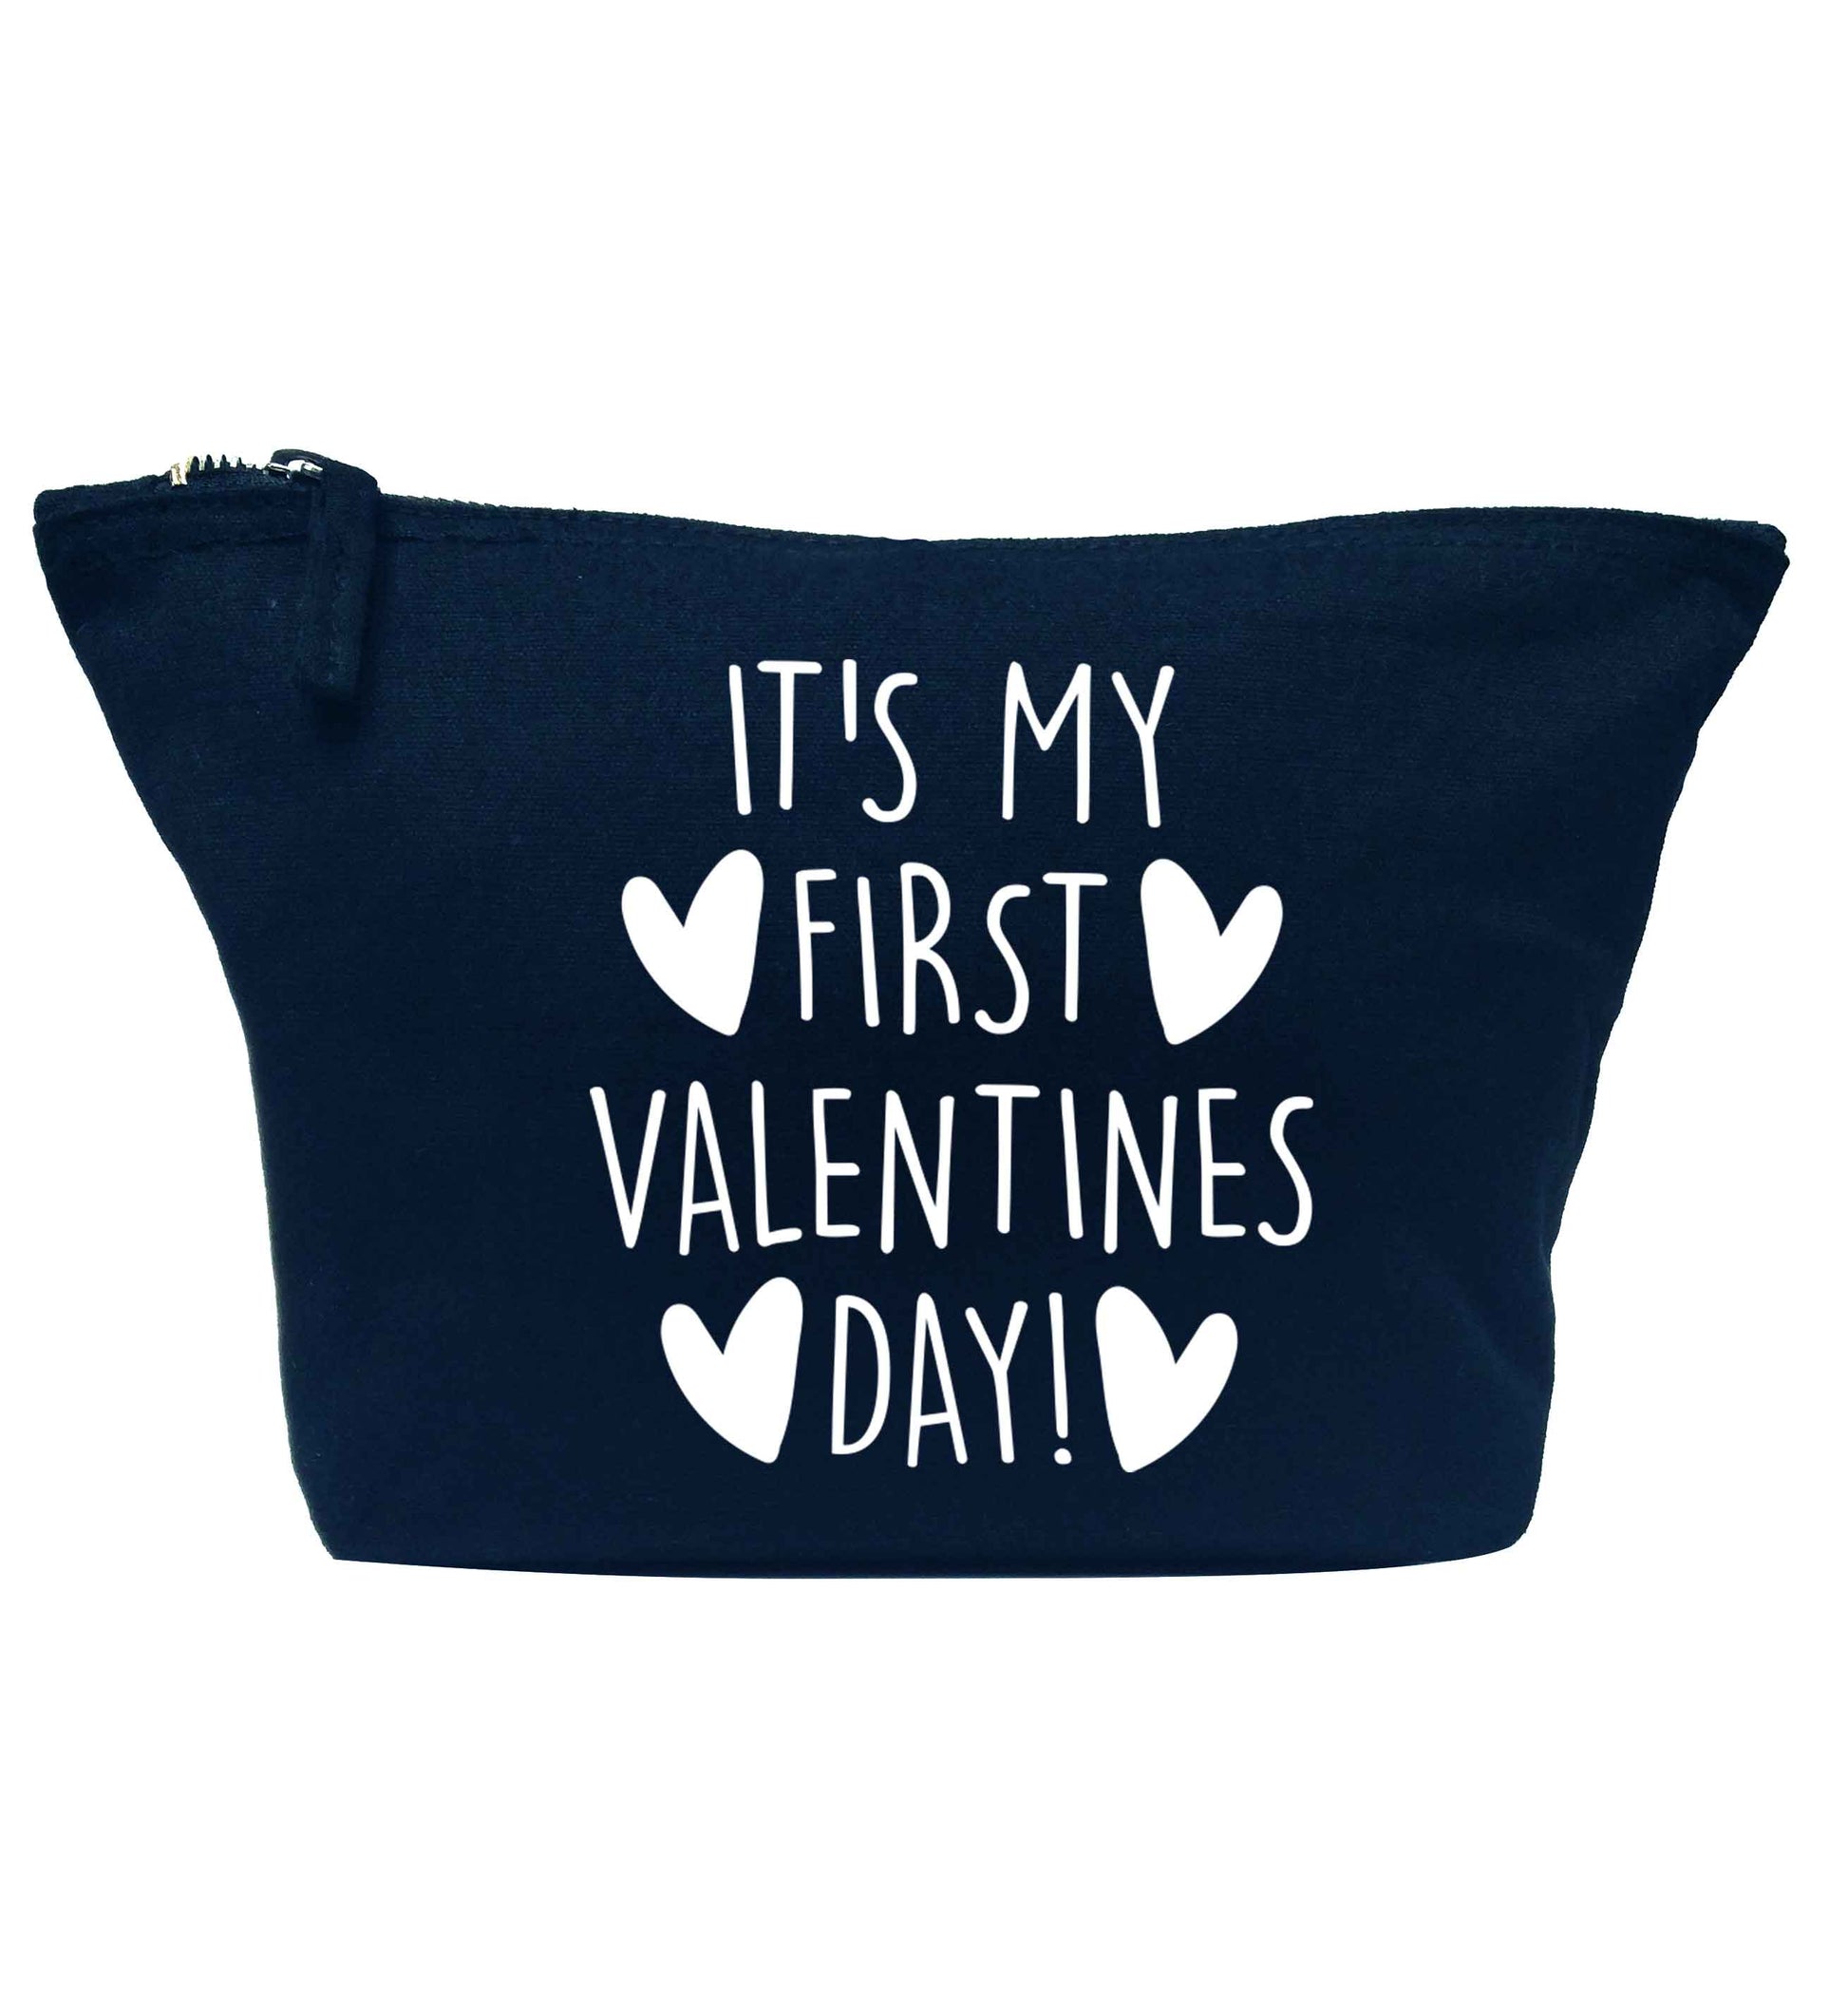 It's my first valentines day! navy makeup bag